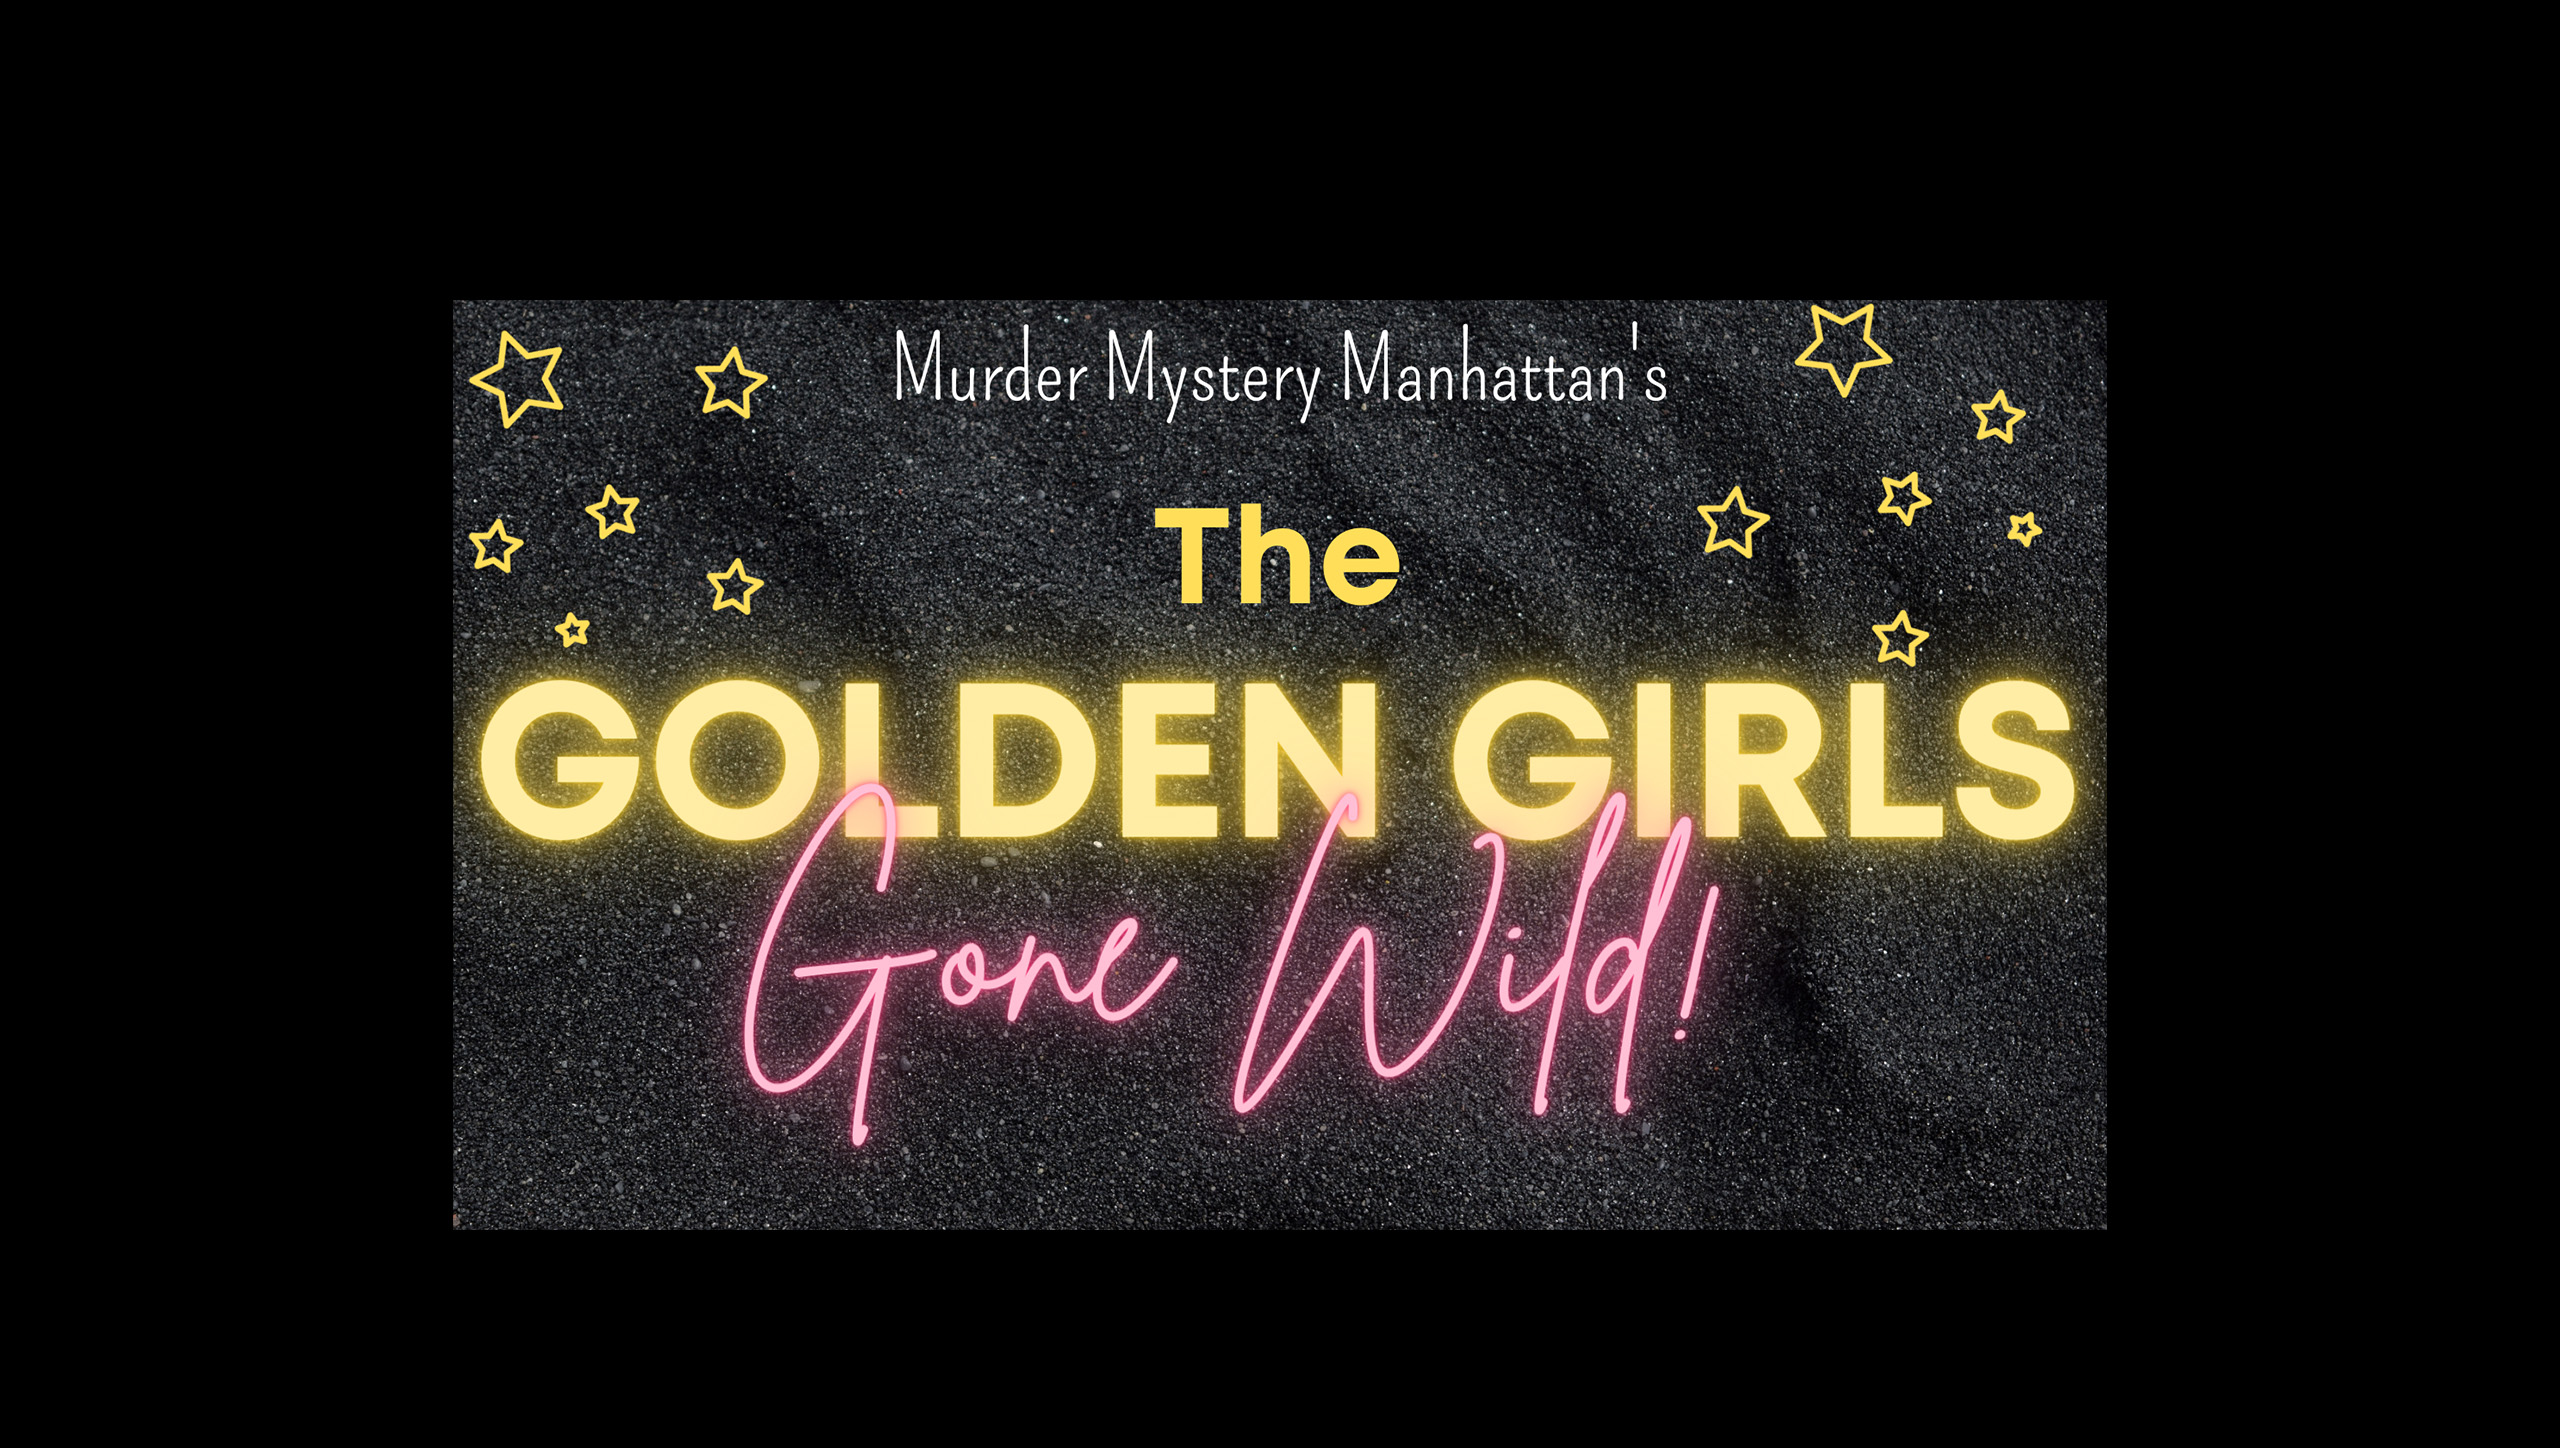 THE GOLDEN GIRLS GONE WILD! DIRECT FROM NY - A HILARIOUS INTERACTIVE MURDER MYSTERY BASED ON THE HIT TV SERIES 